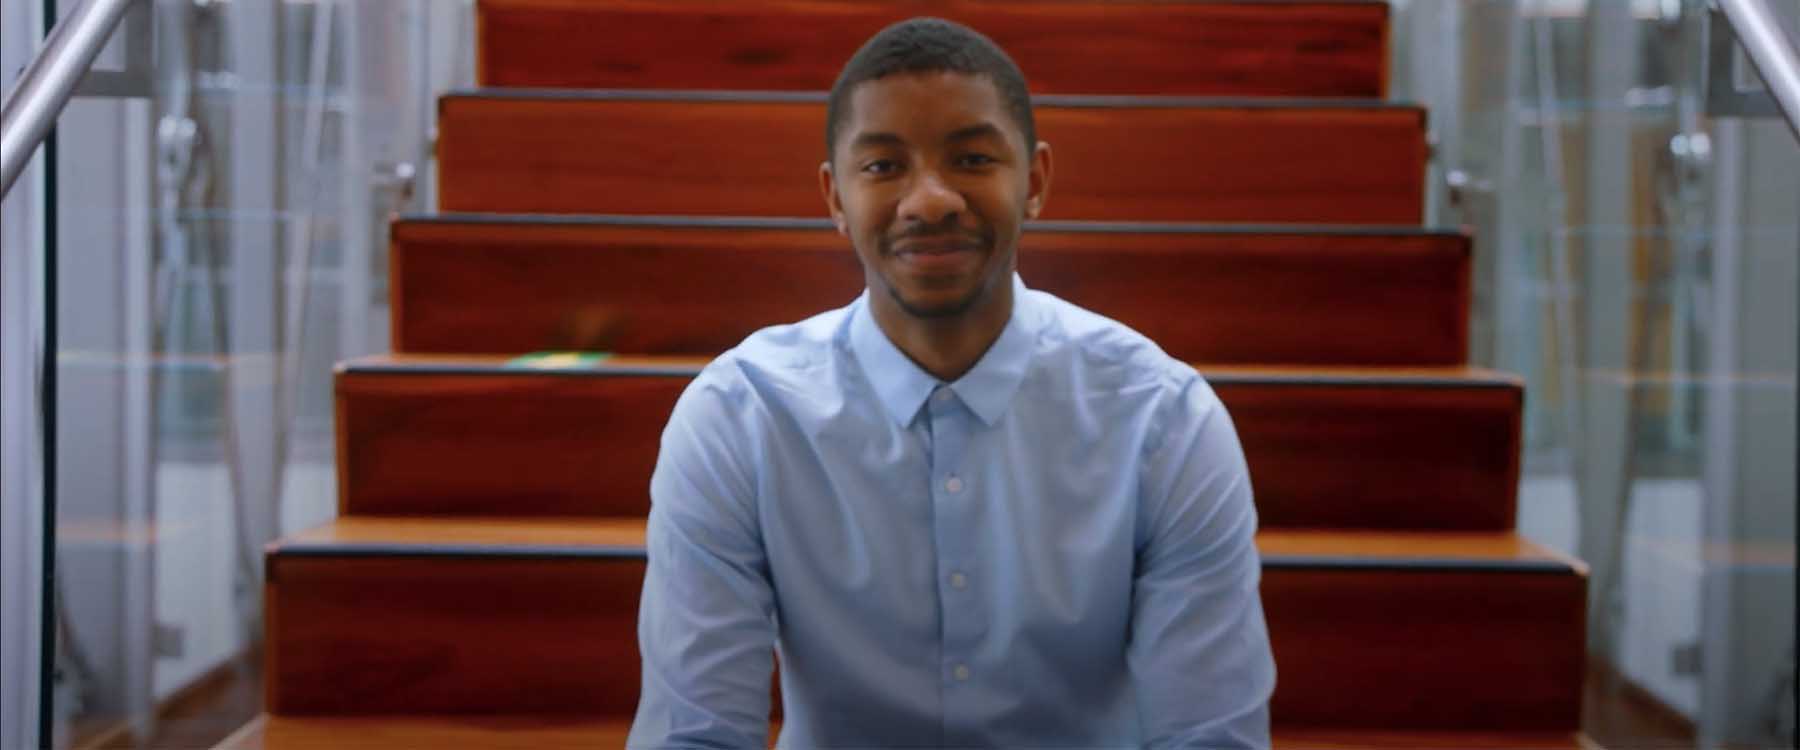 Technology visionary and alumnus Adonis Abdullah ’21, ’22M.S. is forging ahead on his entrepreneurial journey as co-founder of the startup Hot Route Analytics.